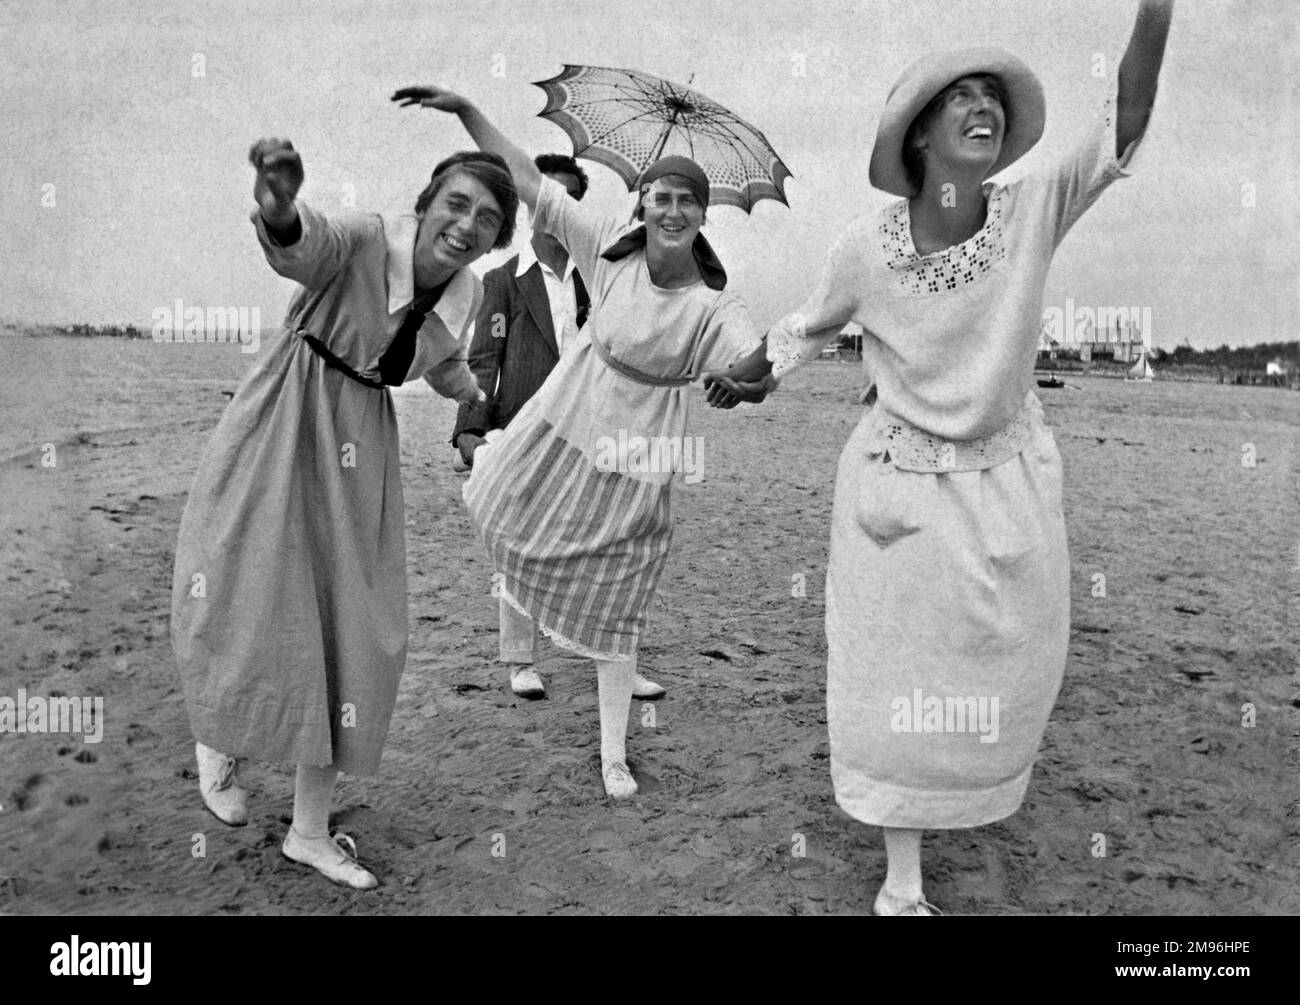 Three women striking funny poses on a beach.  A man in the background holds a parasol. Stock Photo